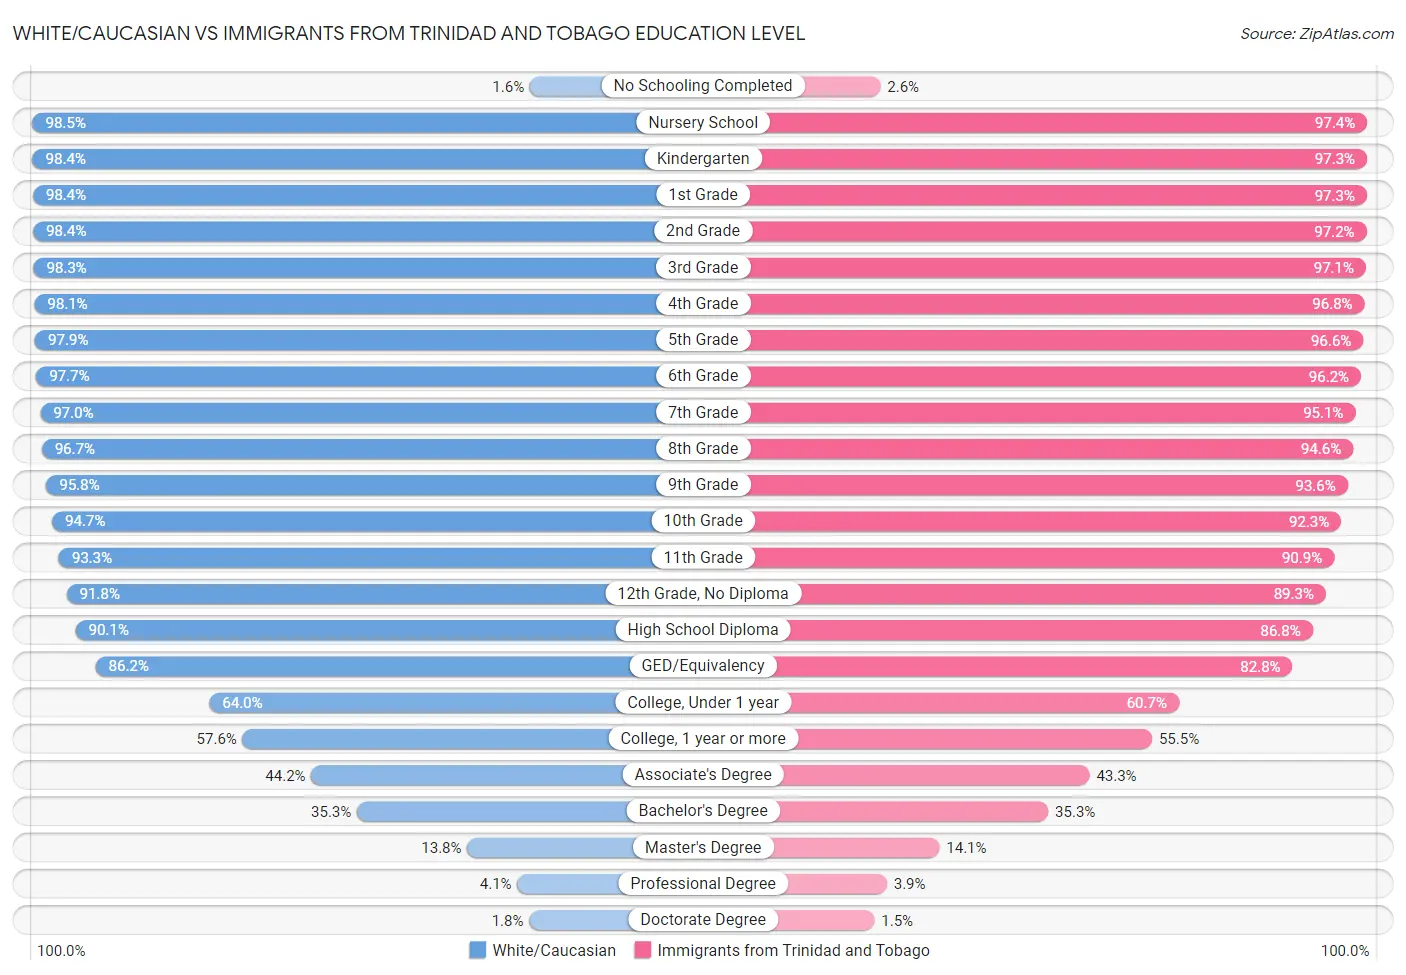 White/Caucasian vs Immigrants from Trinidad and Tobago Education Level